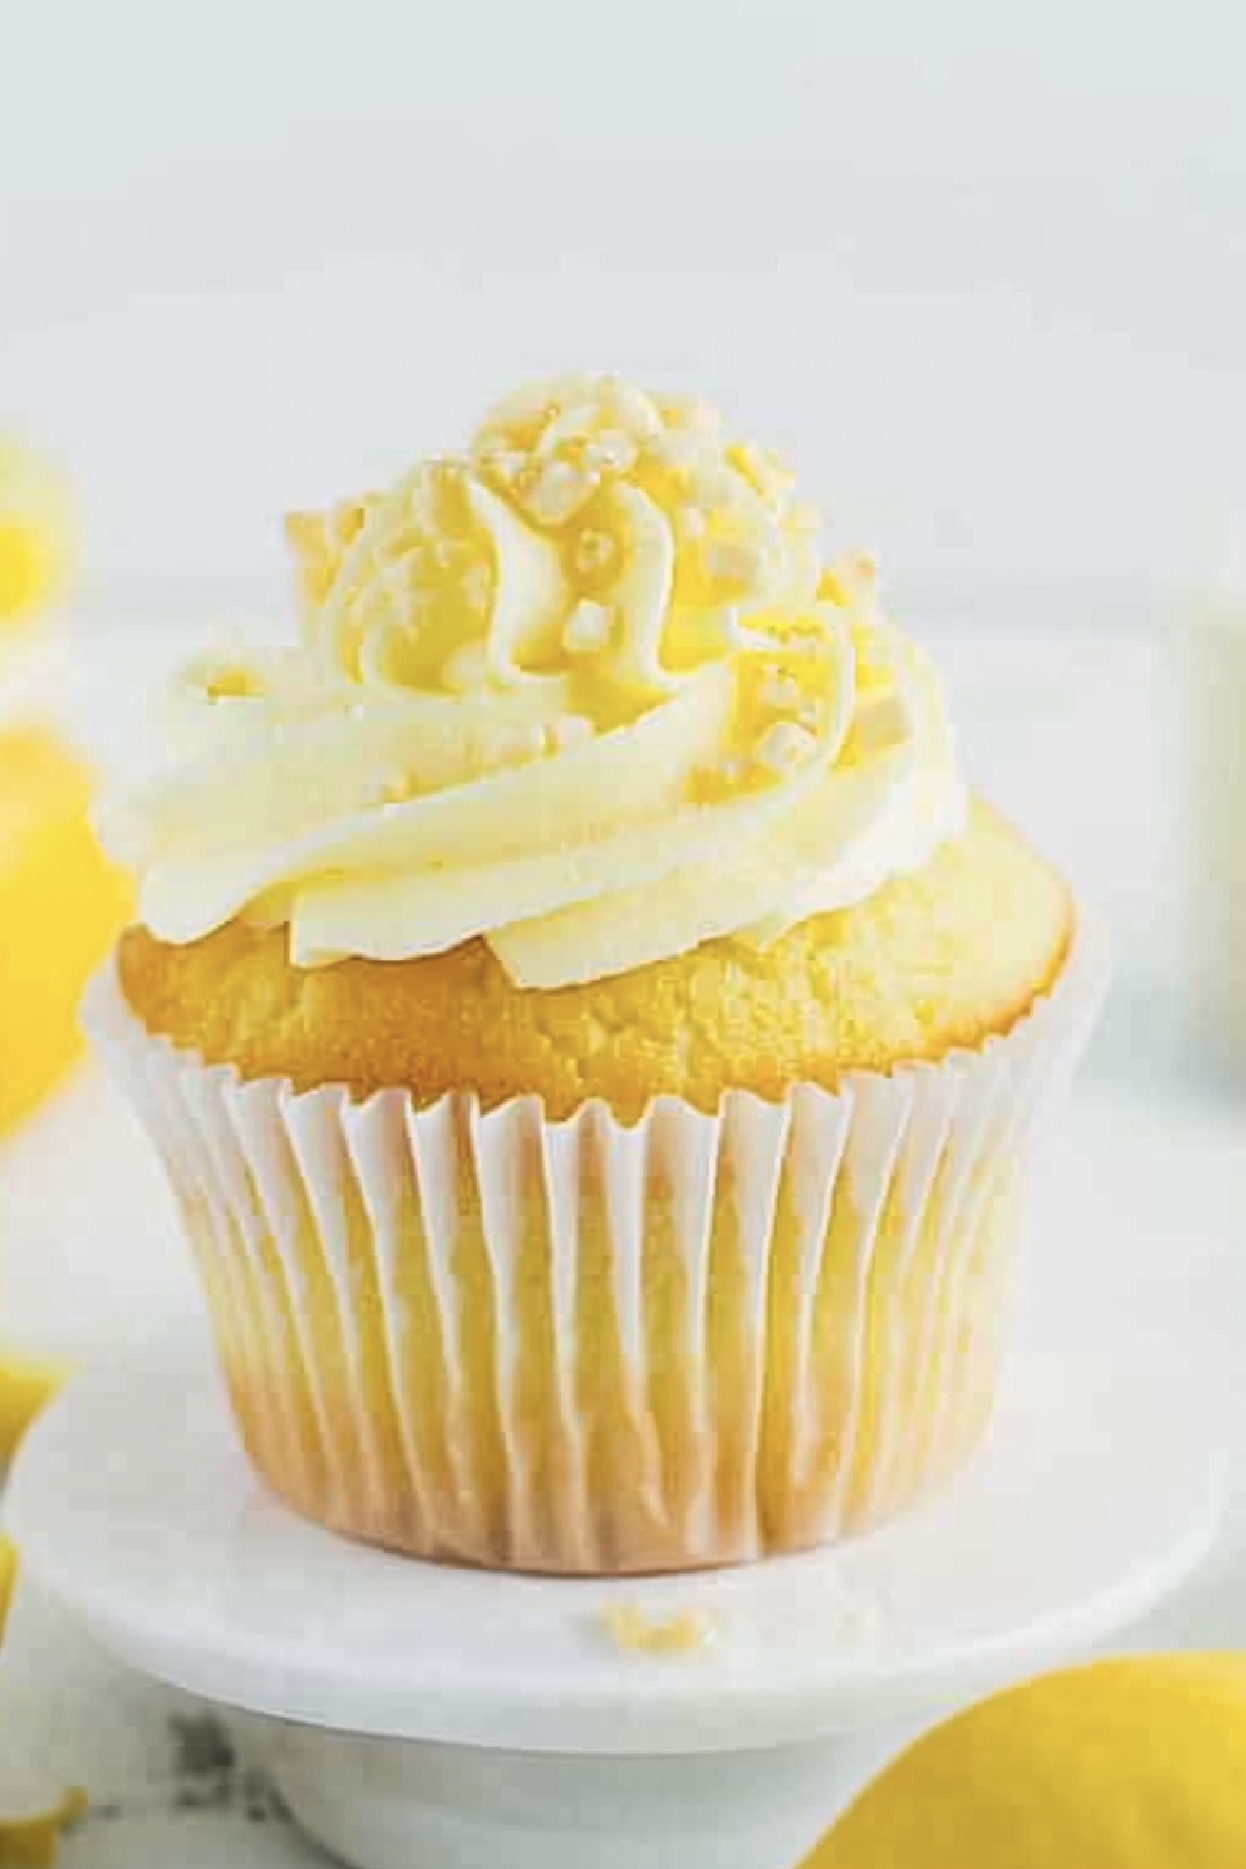 Learn the secrets to baking the perfect Lemon Cupcakes with our foolproof recipe, guaranteed to bring a touch of sweetness to your life.